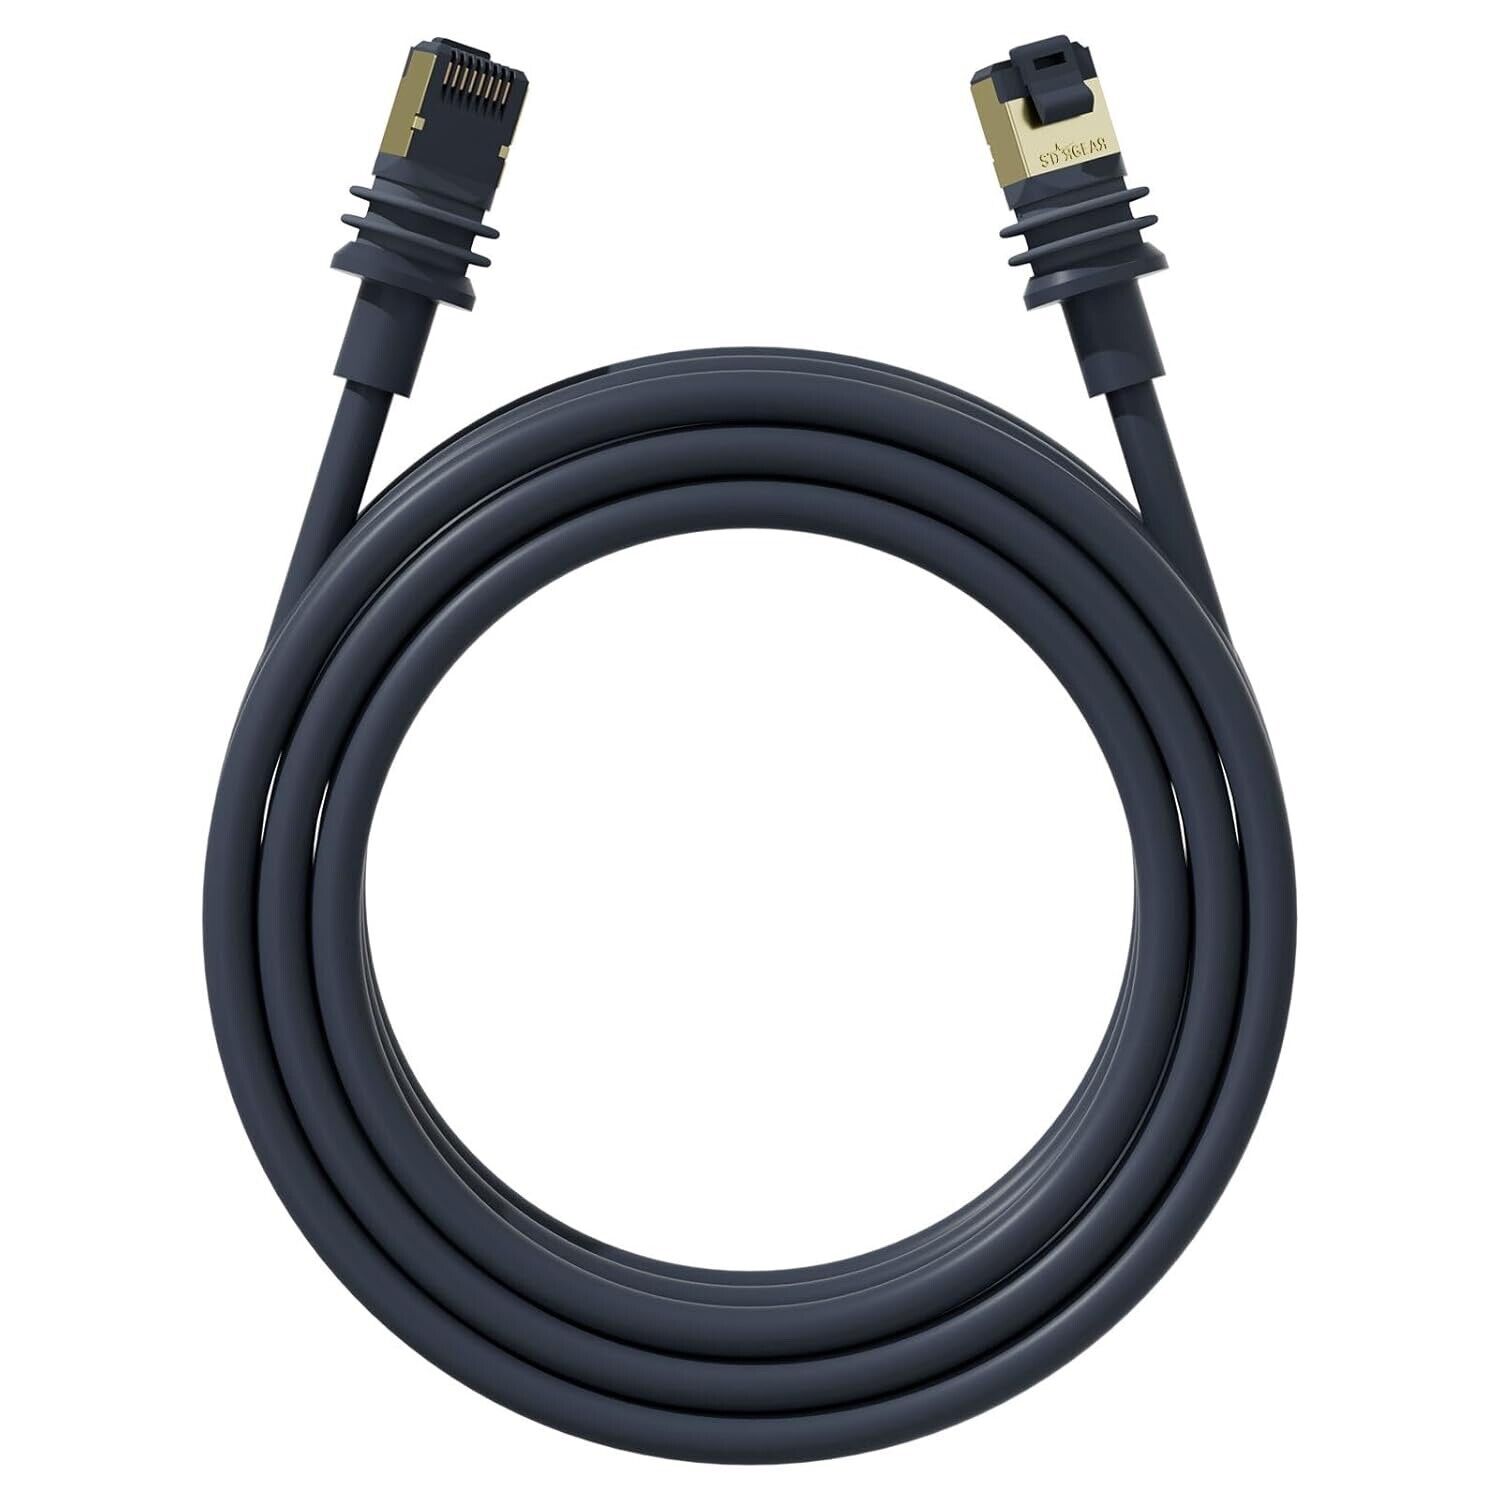 Starlink Gen 3 Cable 16.4FT, Starlink Cable Extension for Starlink